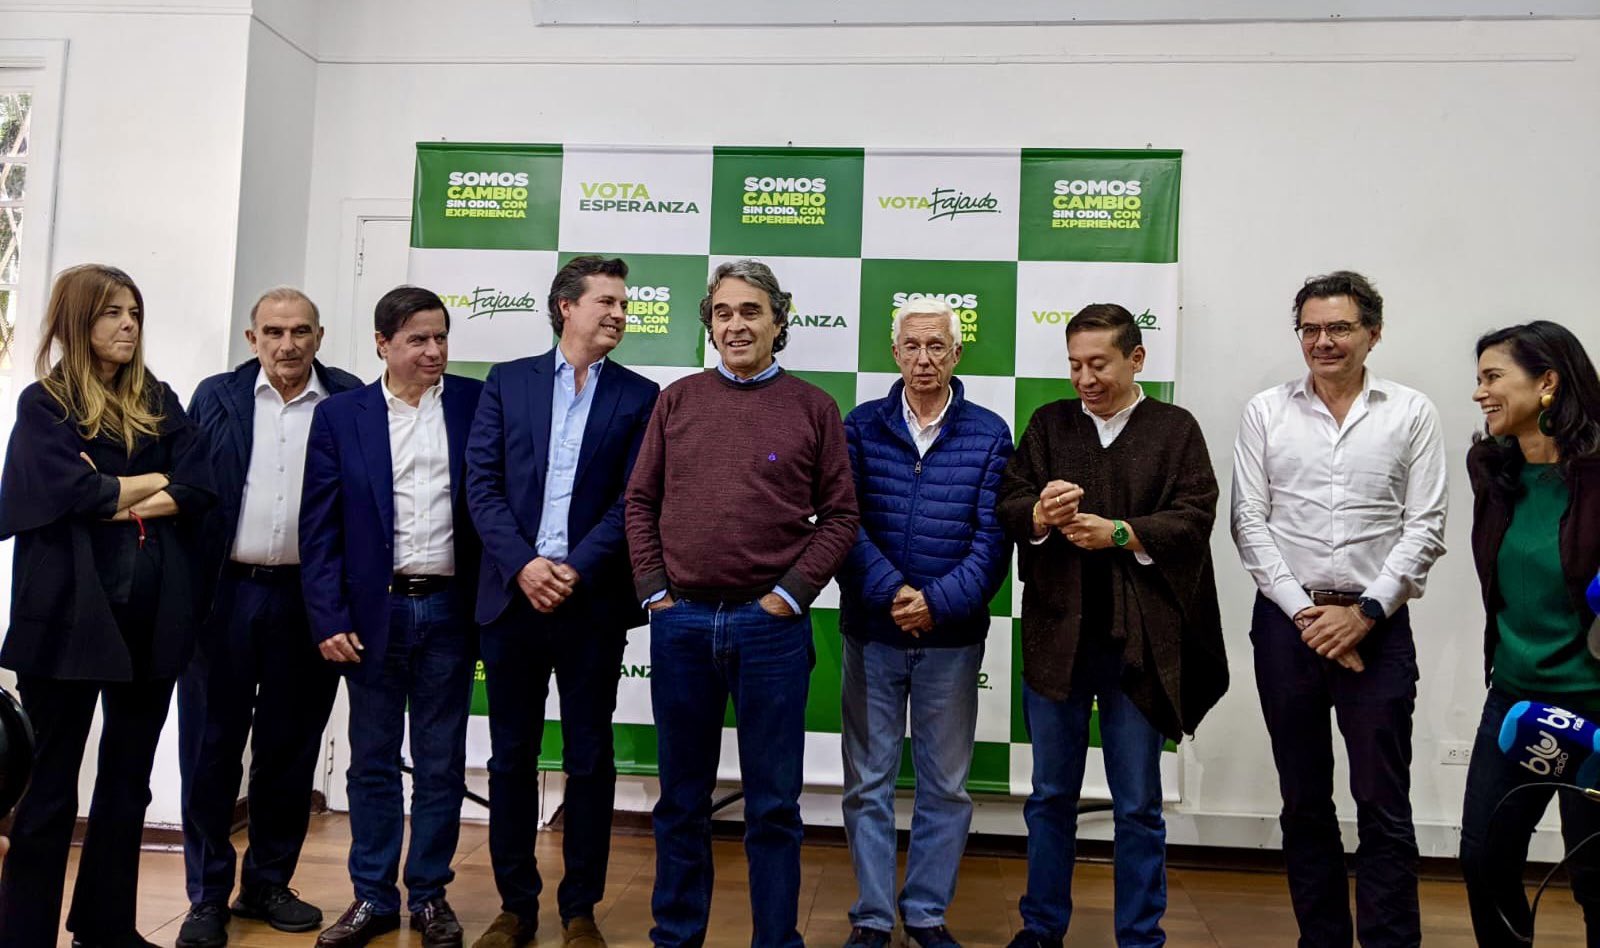 Sergio Fajardo will move away from the members of the Centro Esperanza Coalition to launch, together with Jorge Robledo, a new party.  Twitter @sergio_fajardo